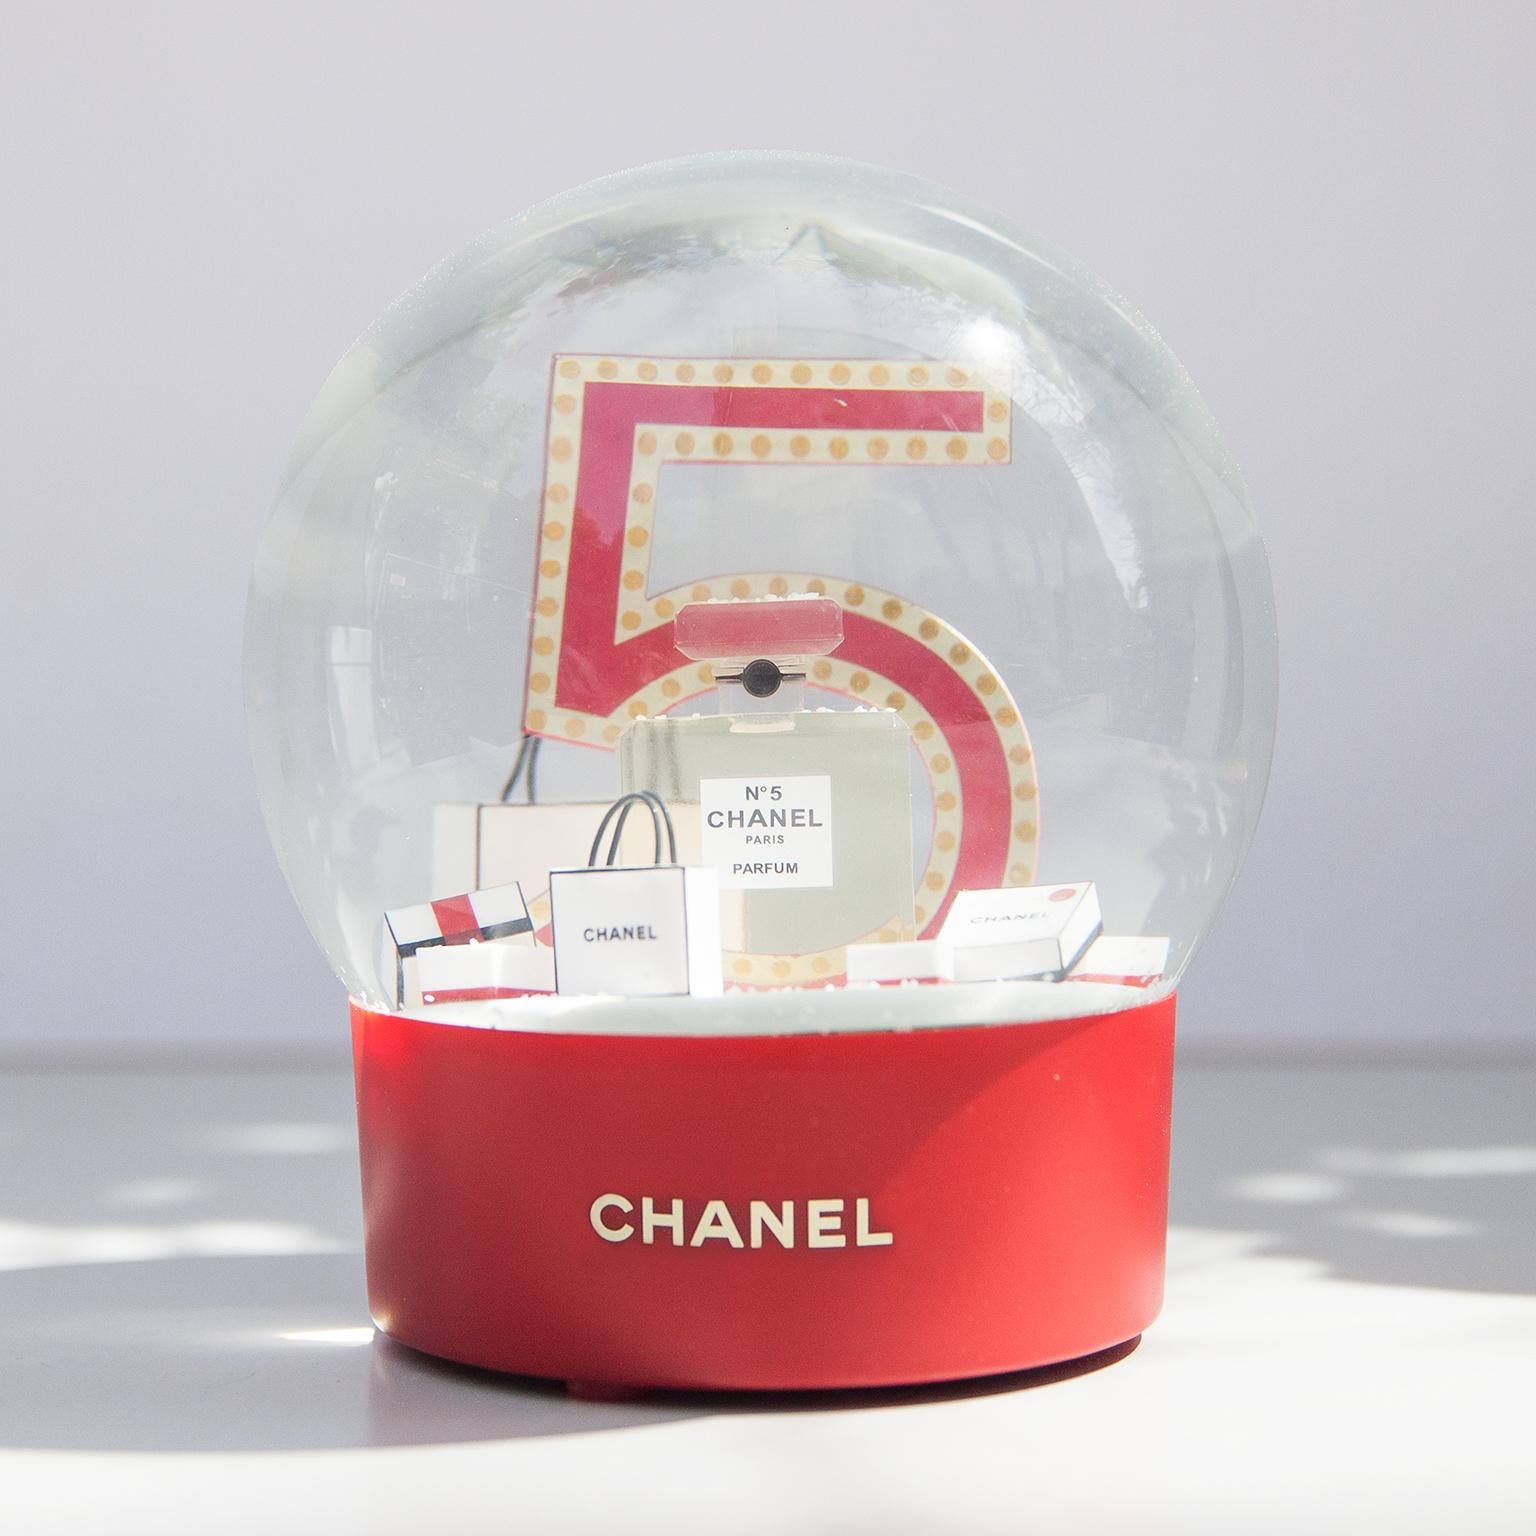 Rare limited edition of a Chanel Snow Ball, which are only for VIP Customers in excellent condition and an electric function for showing the snow. Excellent vintage condition.